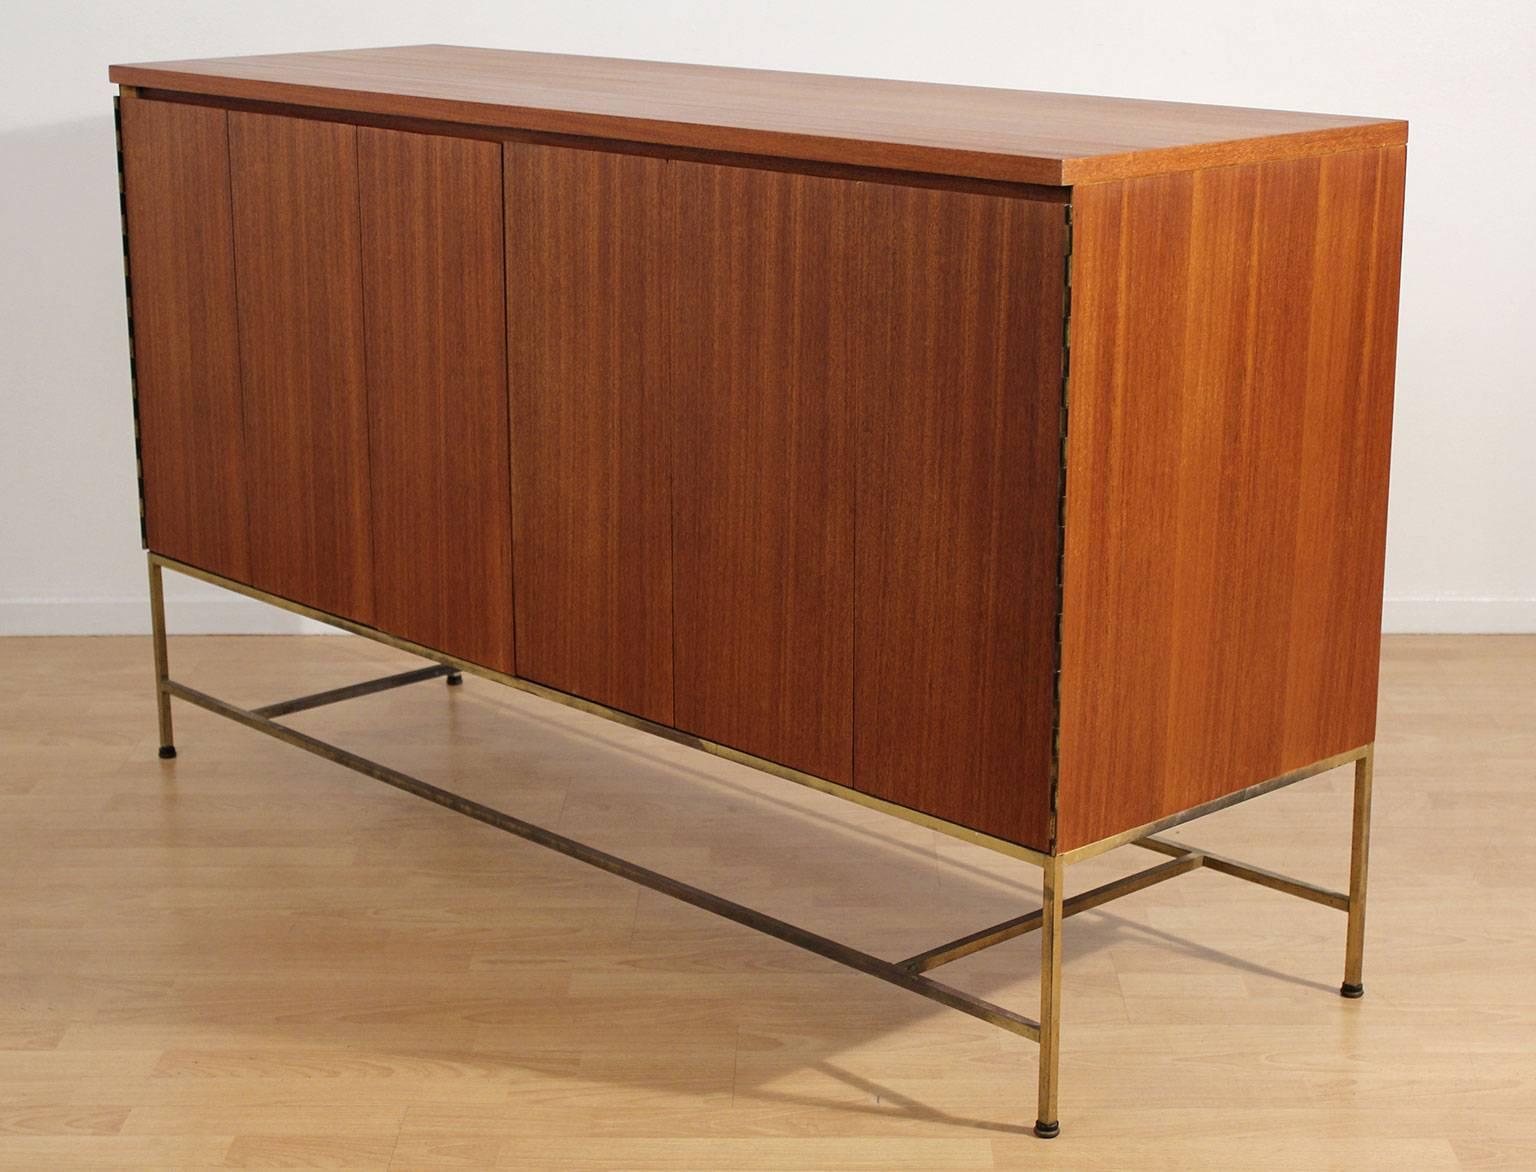 Excellent Paul McCobb designed Credenza for Calvin Furniture, circa 1950s. Iconic style and design. Base is brass with a wonderful patina. Mahogany wood has been refinished and hand oiled to bring out the beauty of the wood. This credenza is a